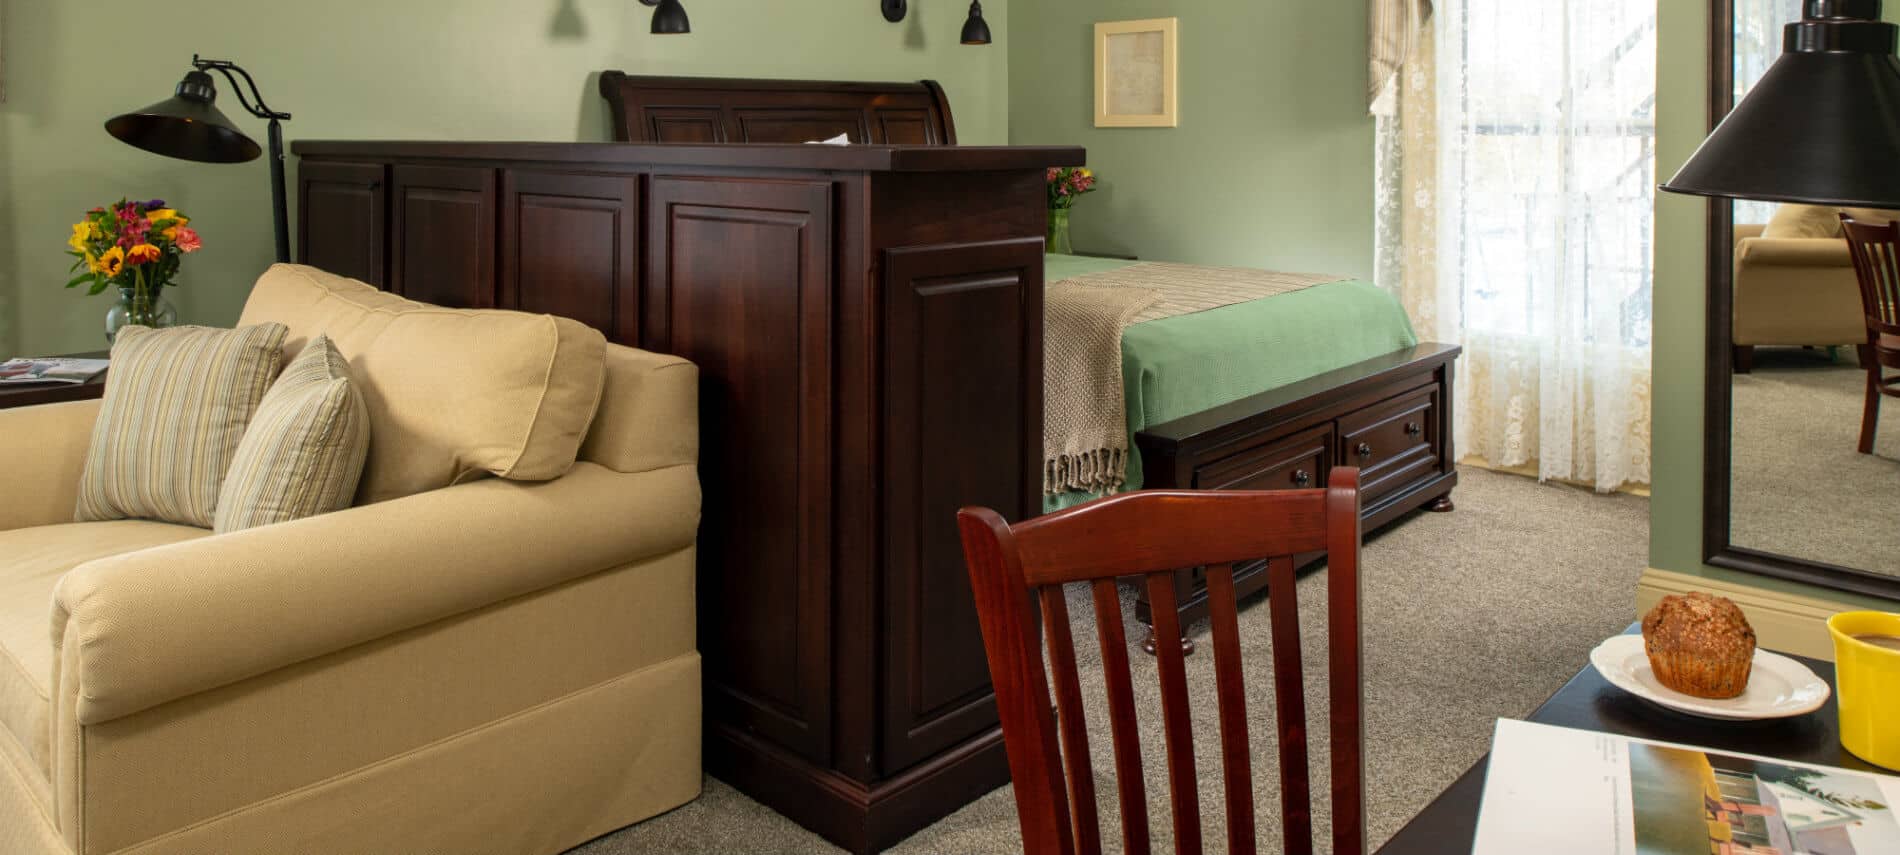 Guestroom with green walls has a seating and desk area separated from the bed with a large cherry wood cabinet.